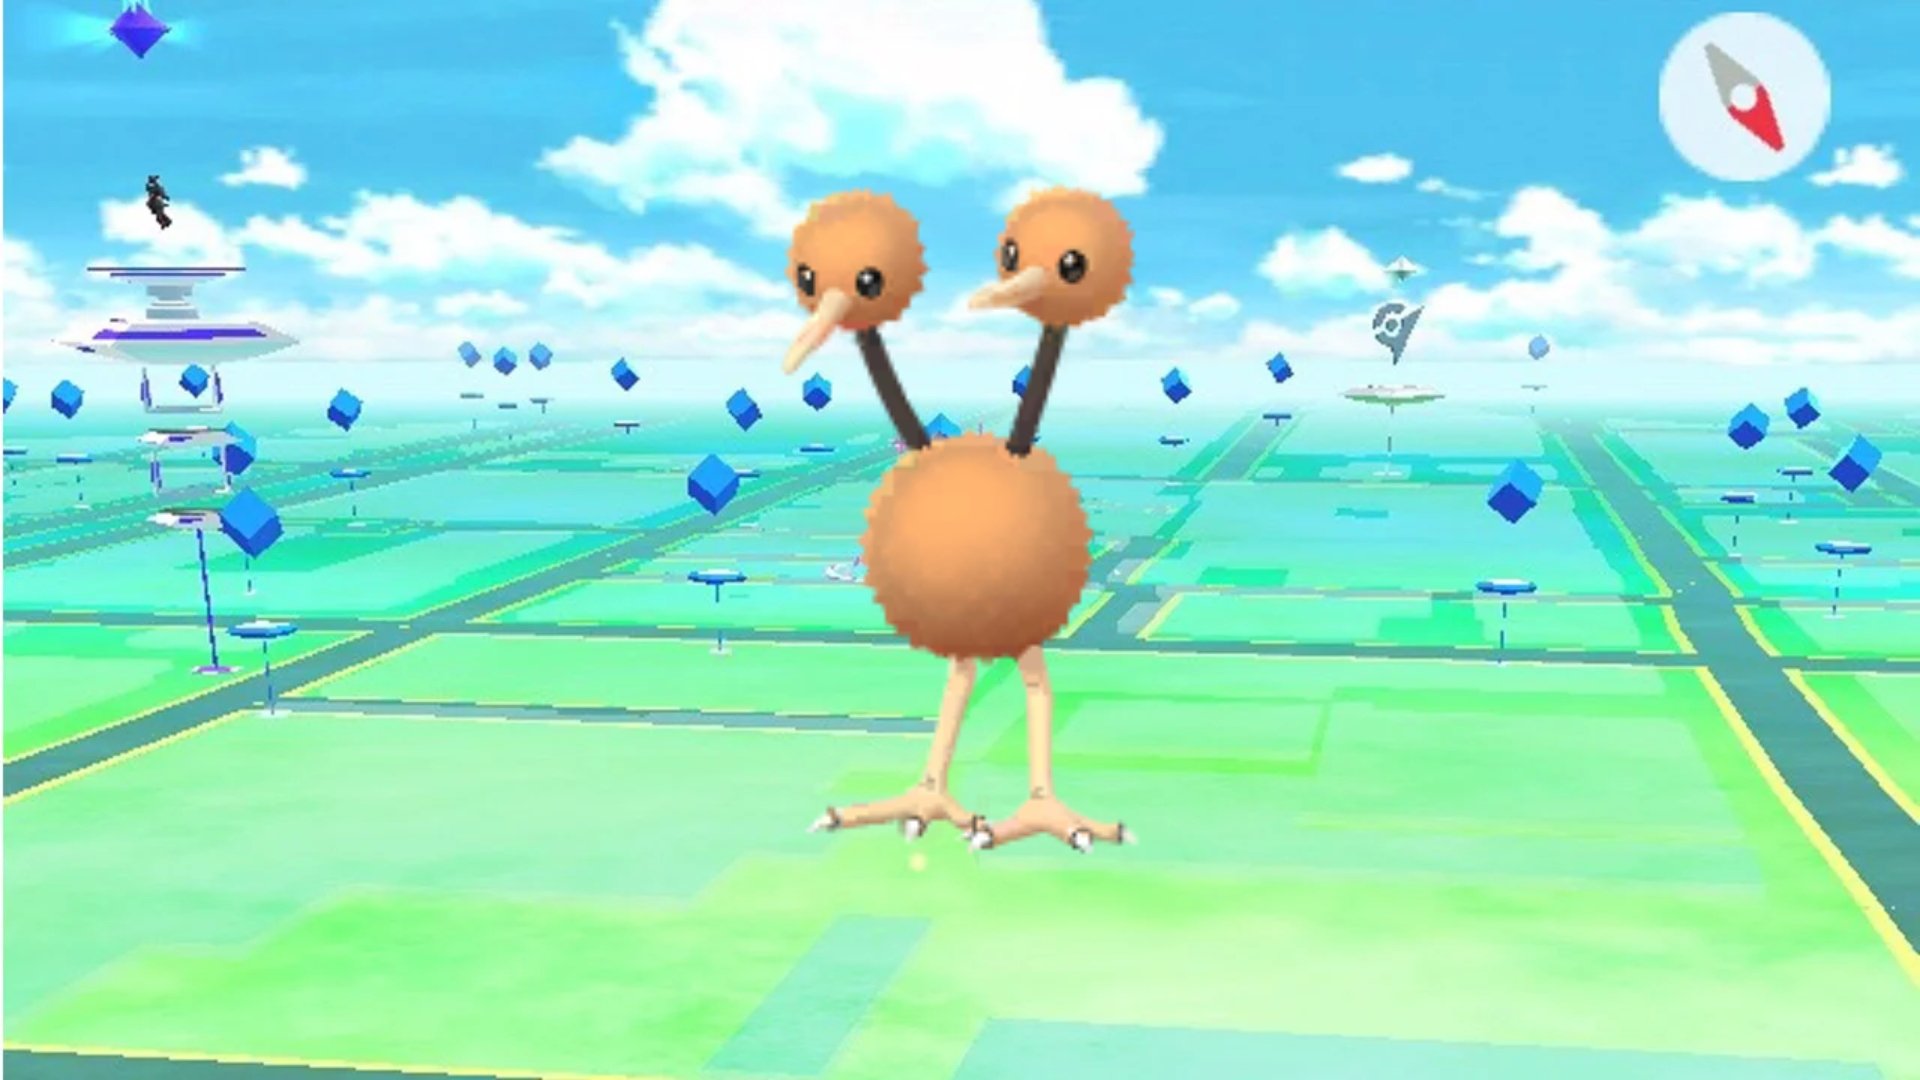 A Doduo from Pokemon GO.